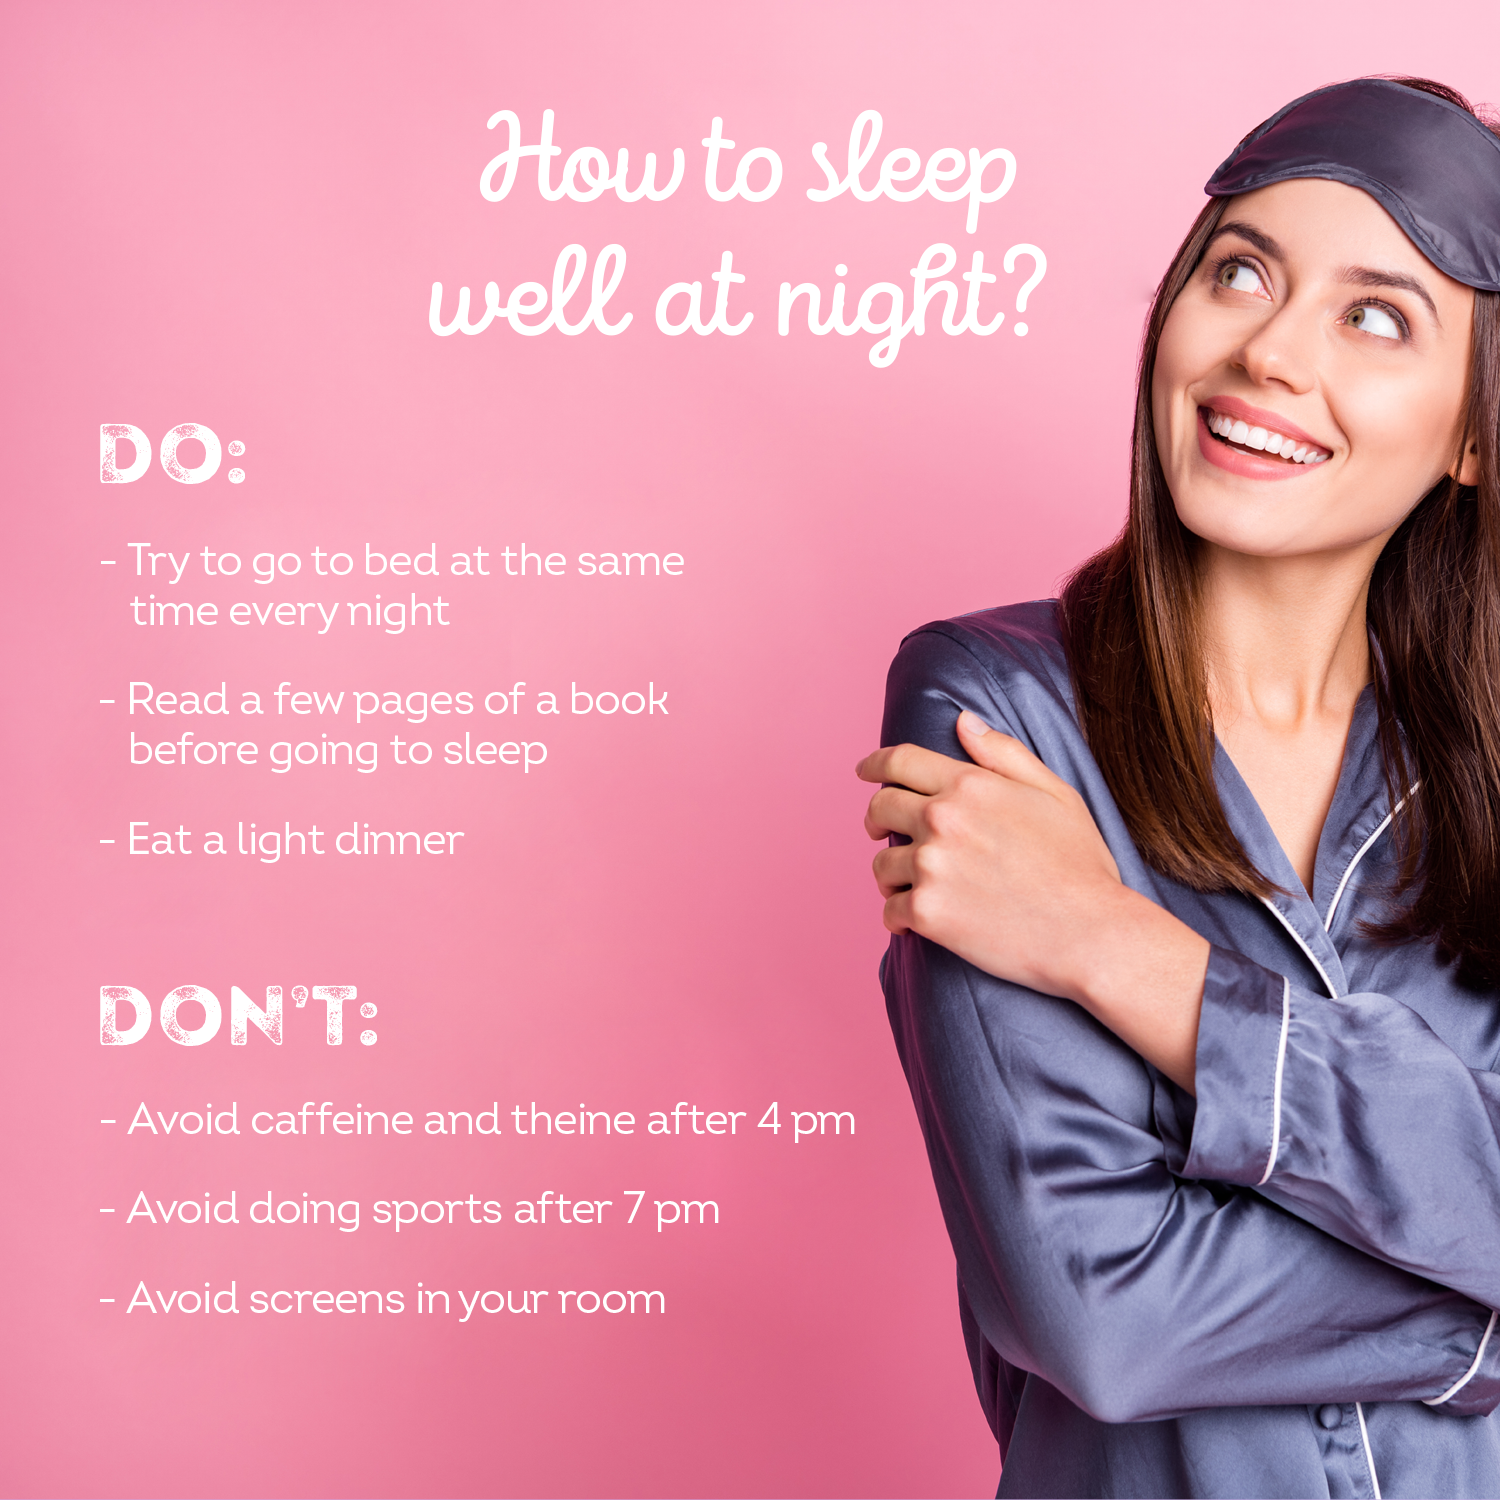 Do and don't to sleep well at night